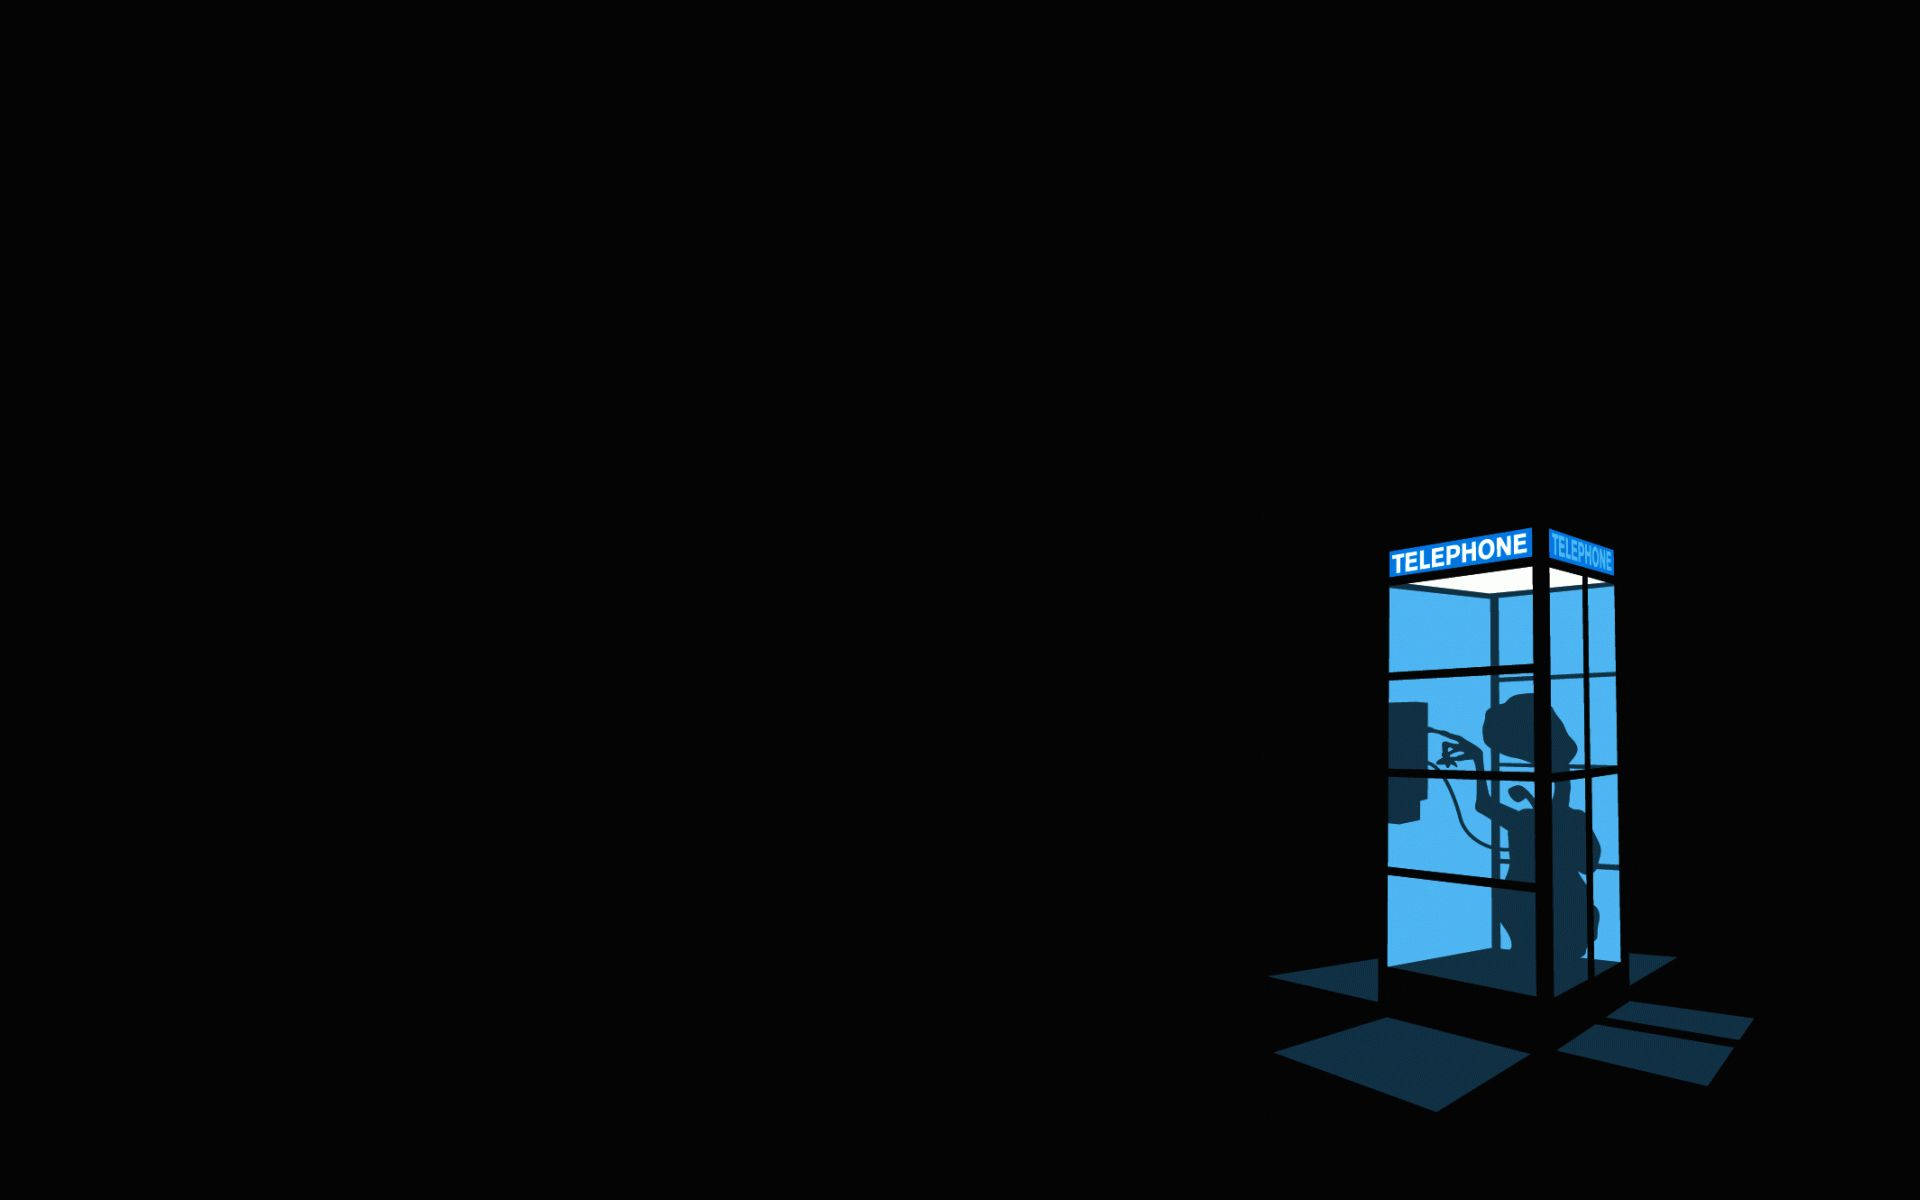 Simple Telephone Booth Background